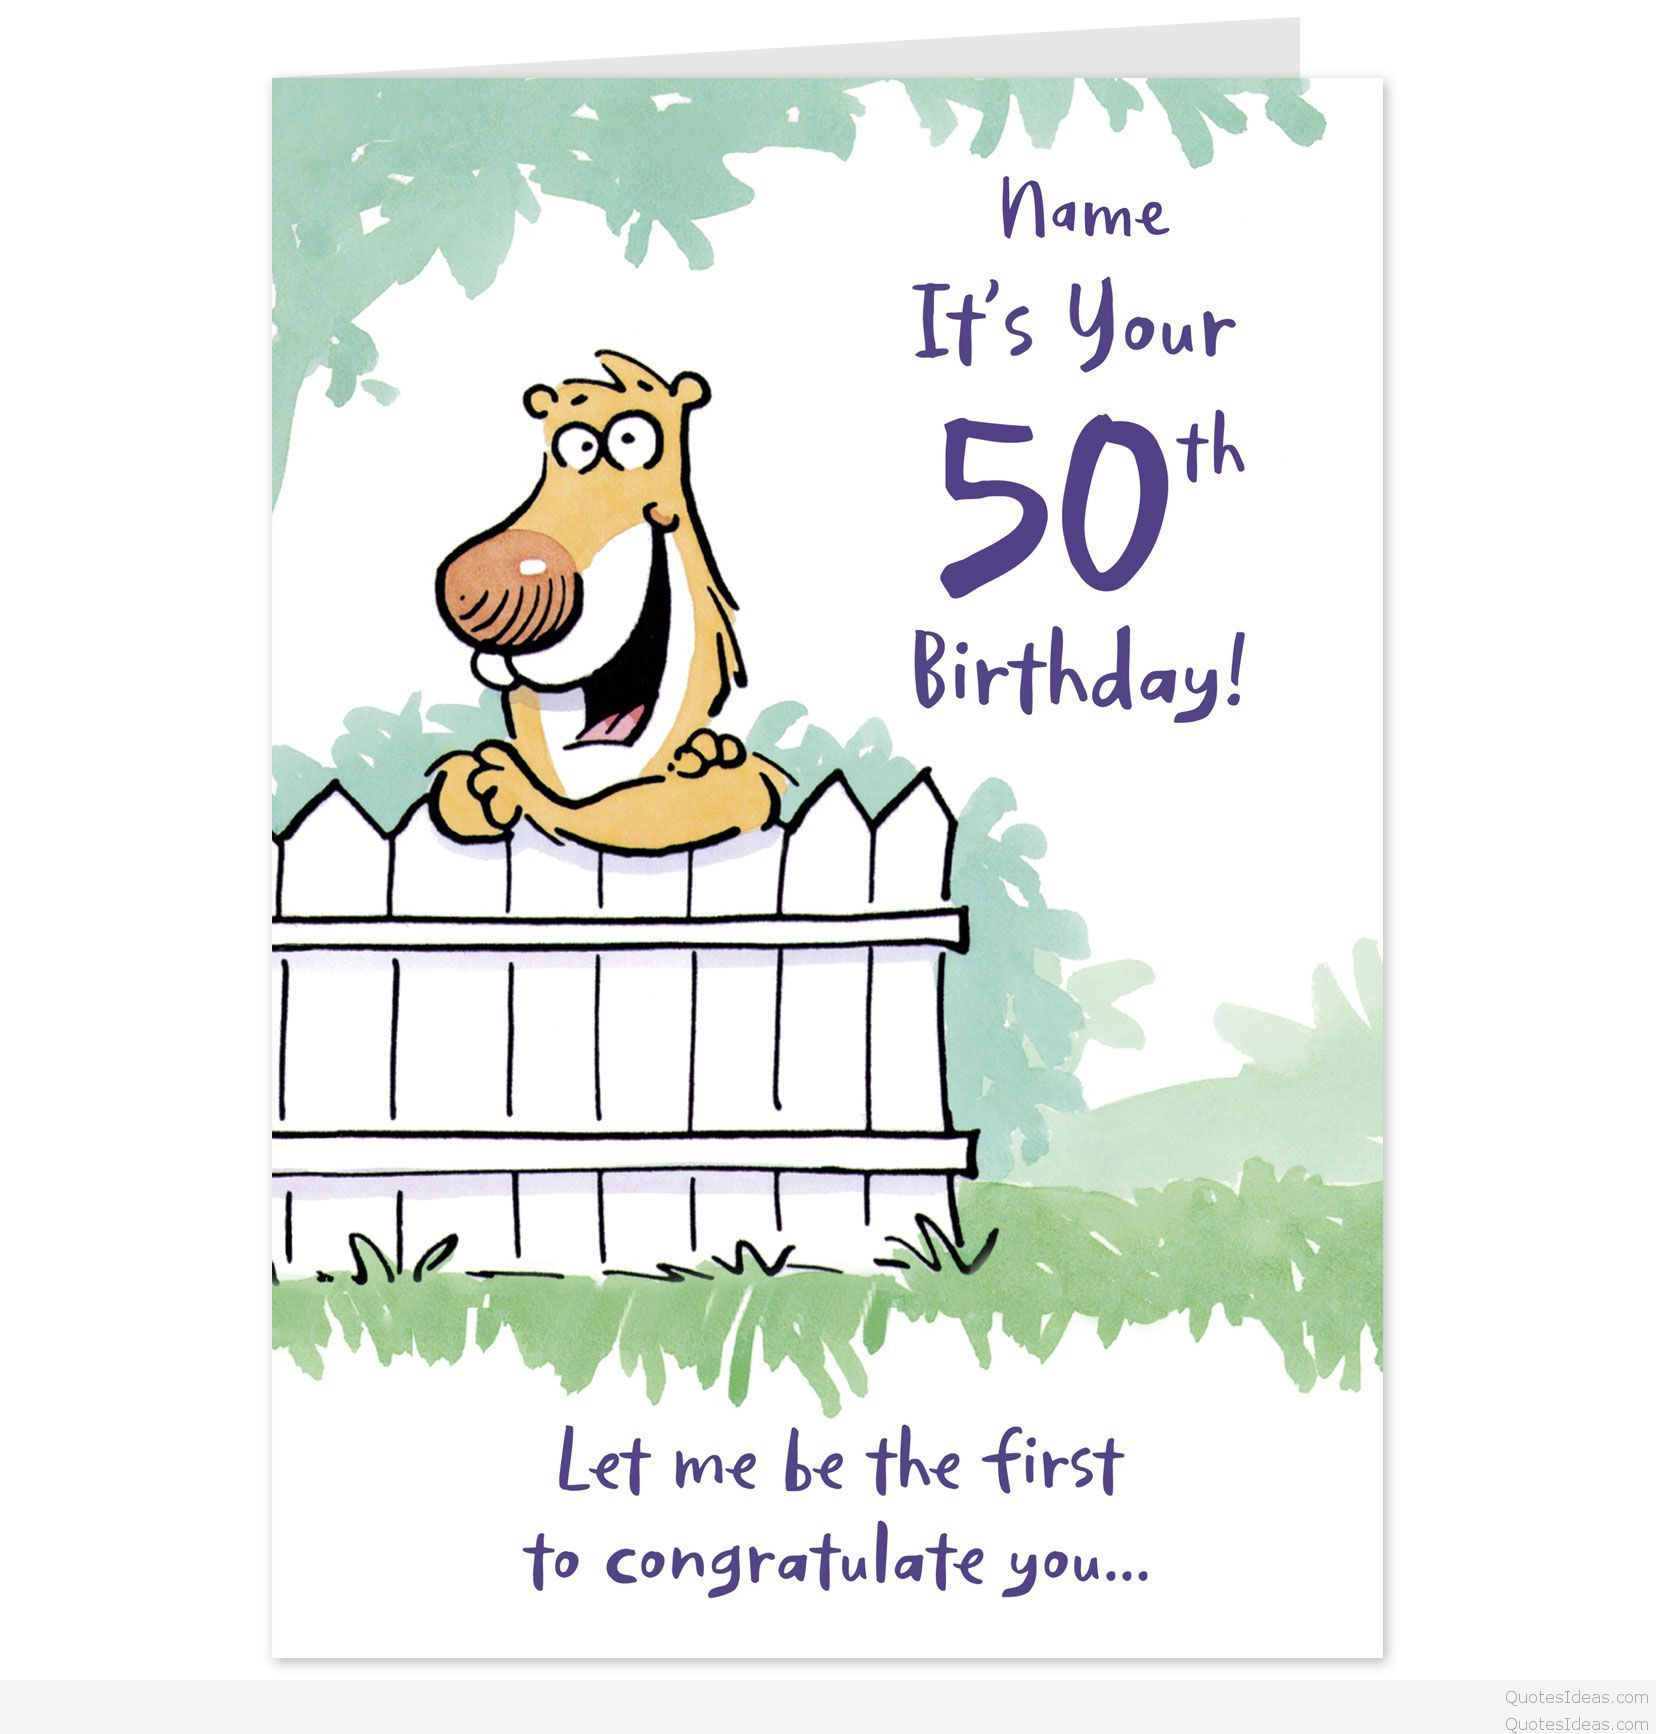 Funny Cards For Birthday
 Latest funny cards quotes and sayings